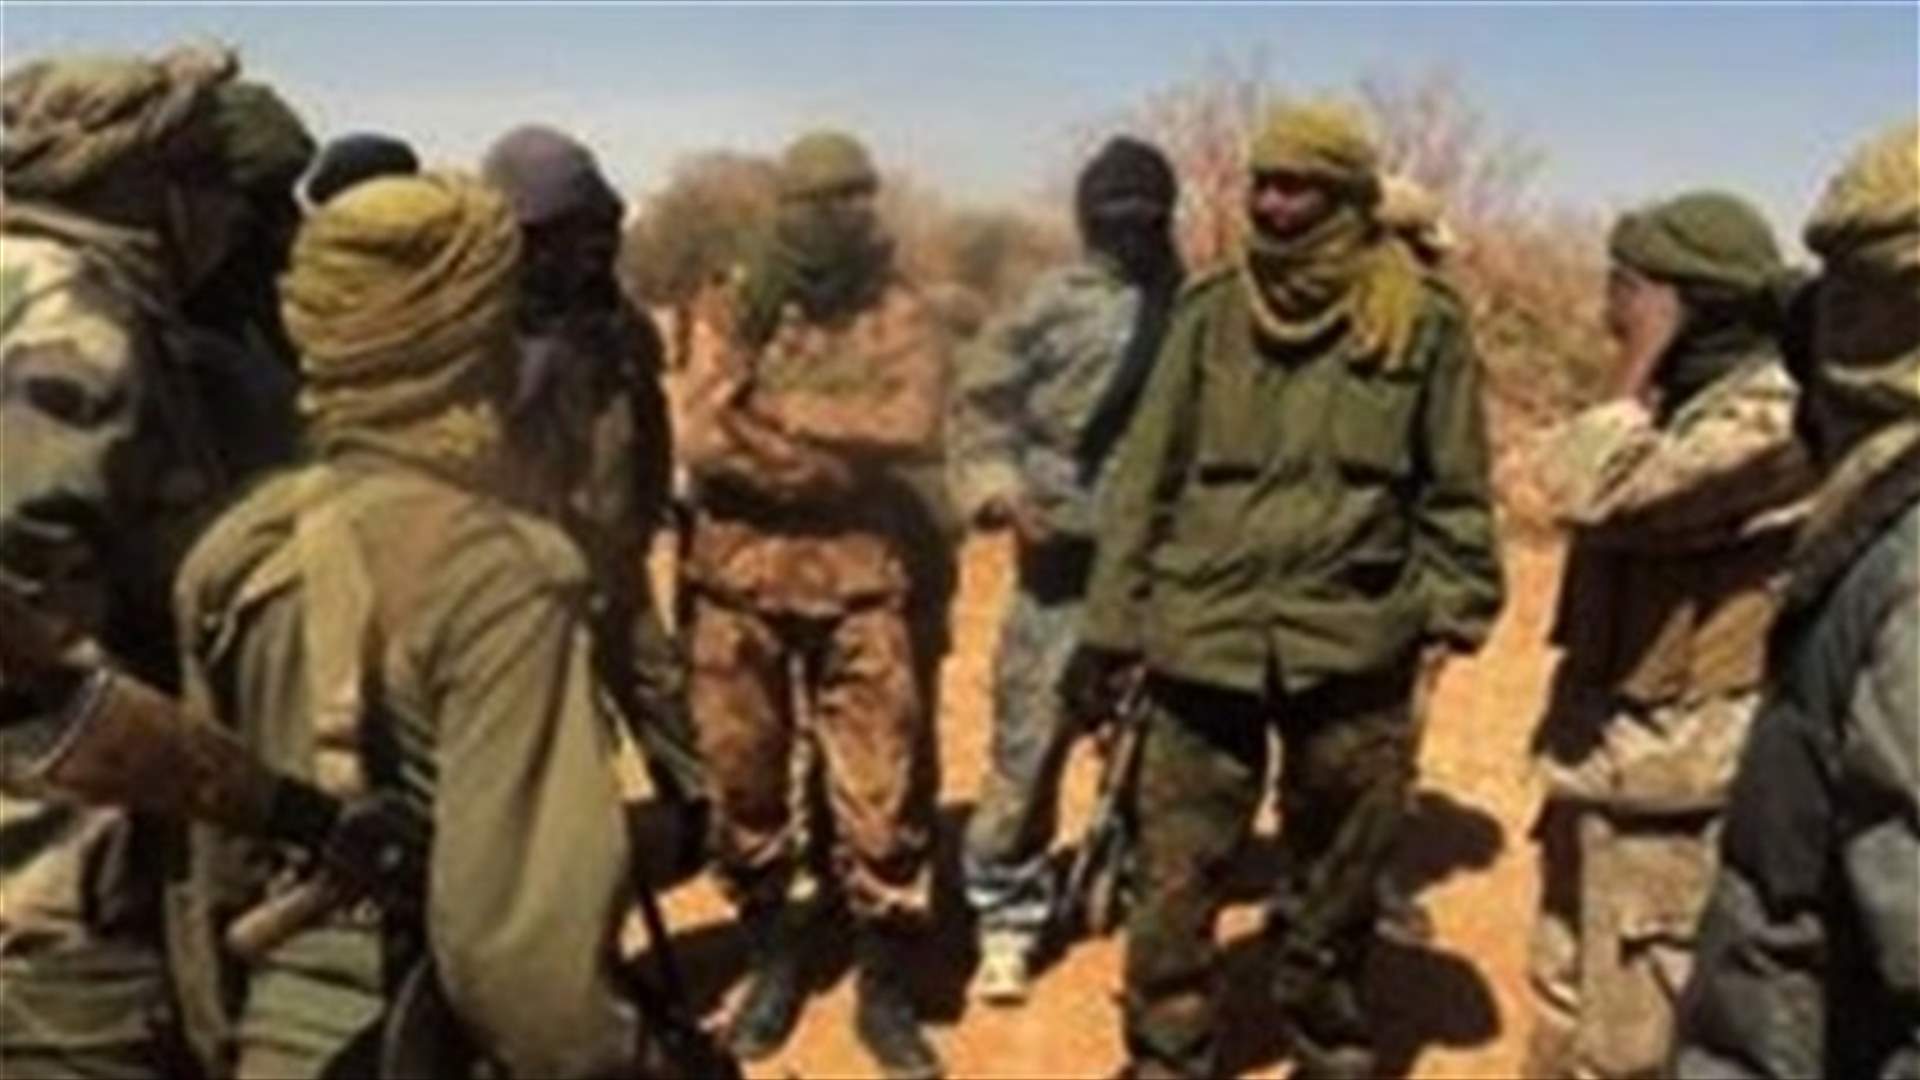 Fears for peace deal as fighting flares in Mali&#39;s desert north